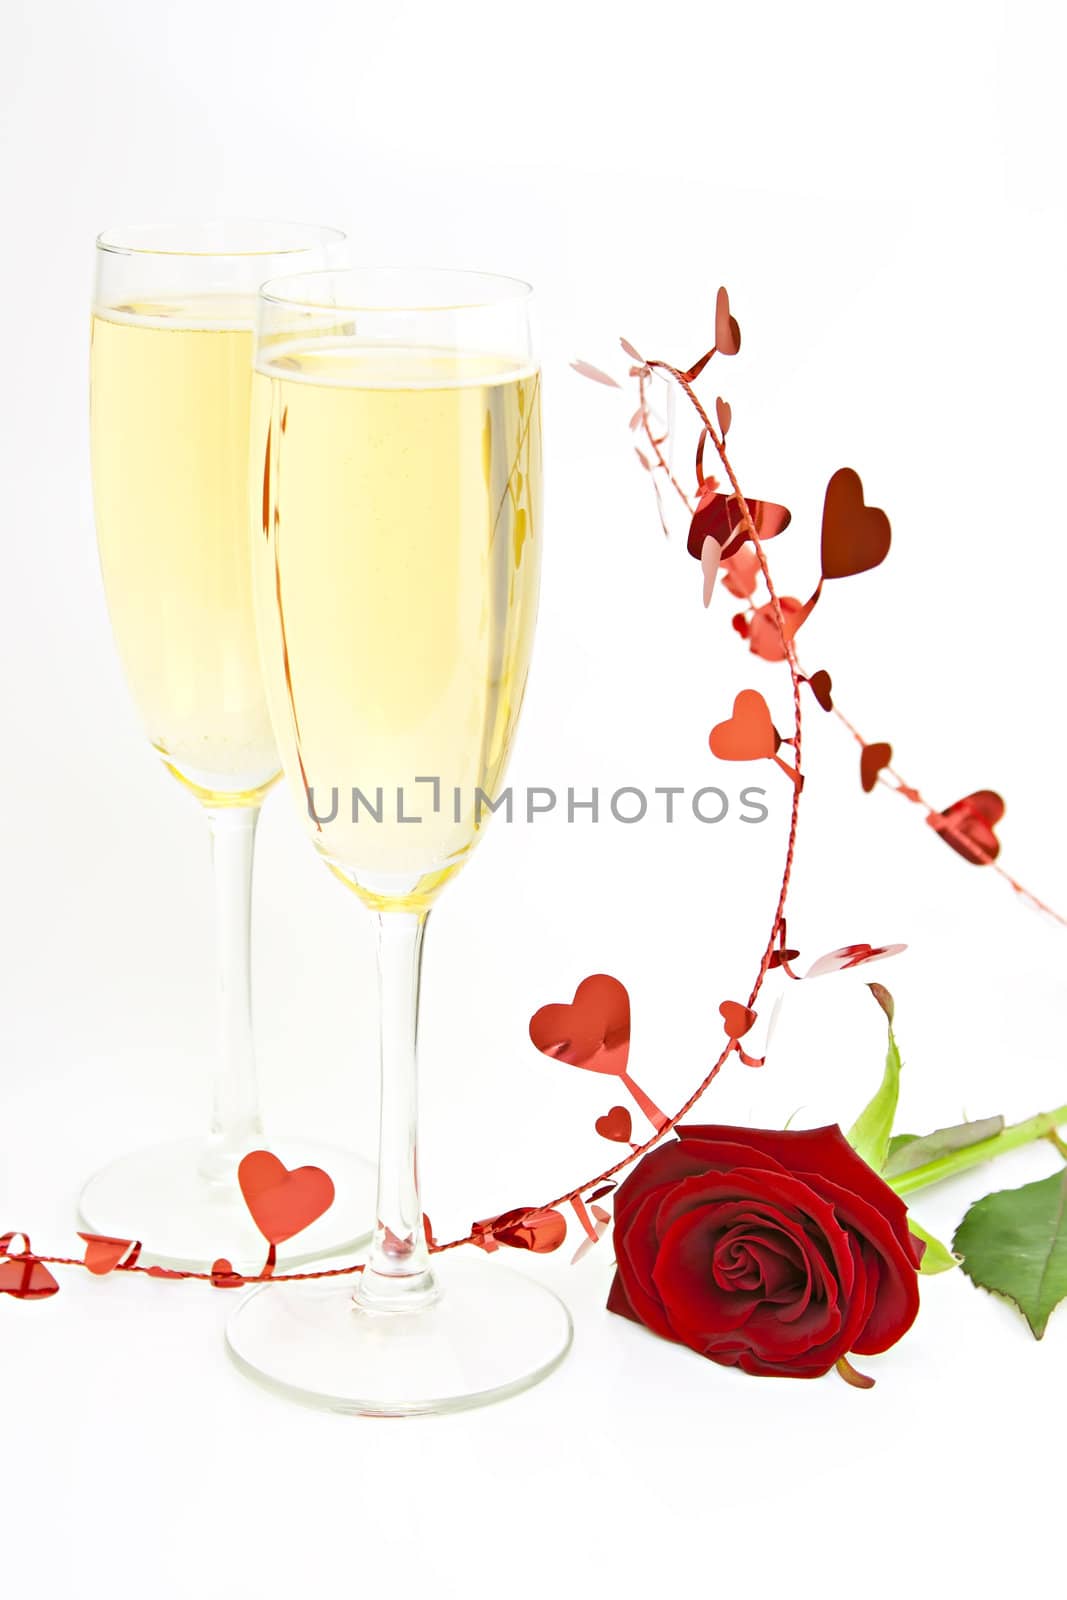 On white champagne glasses and a red rose.
